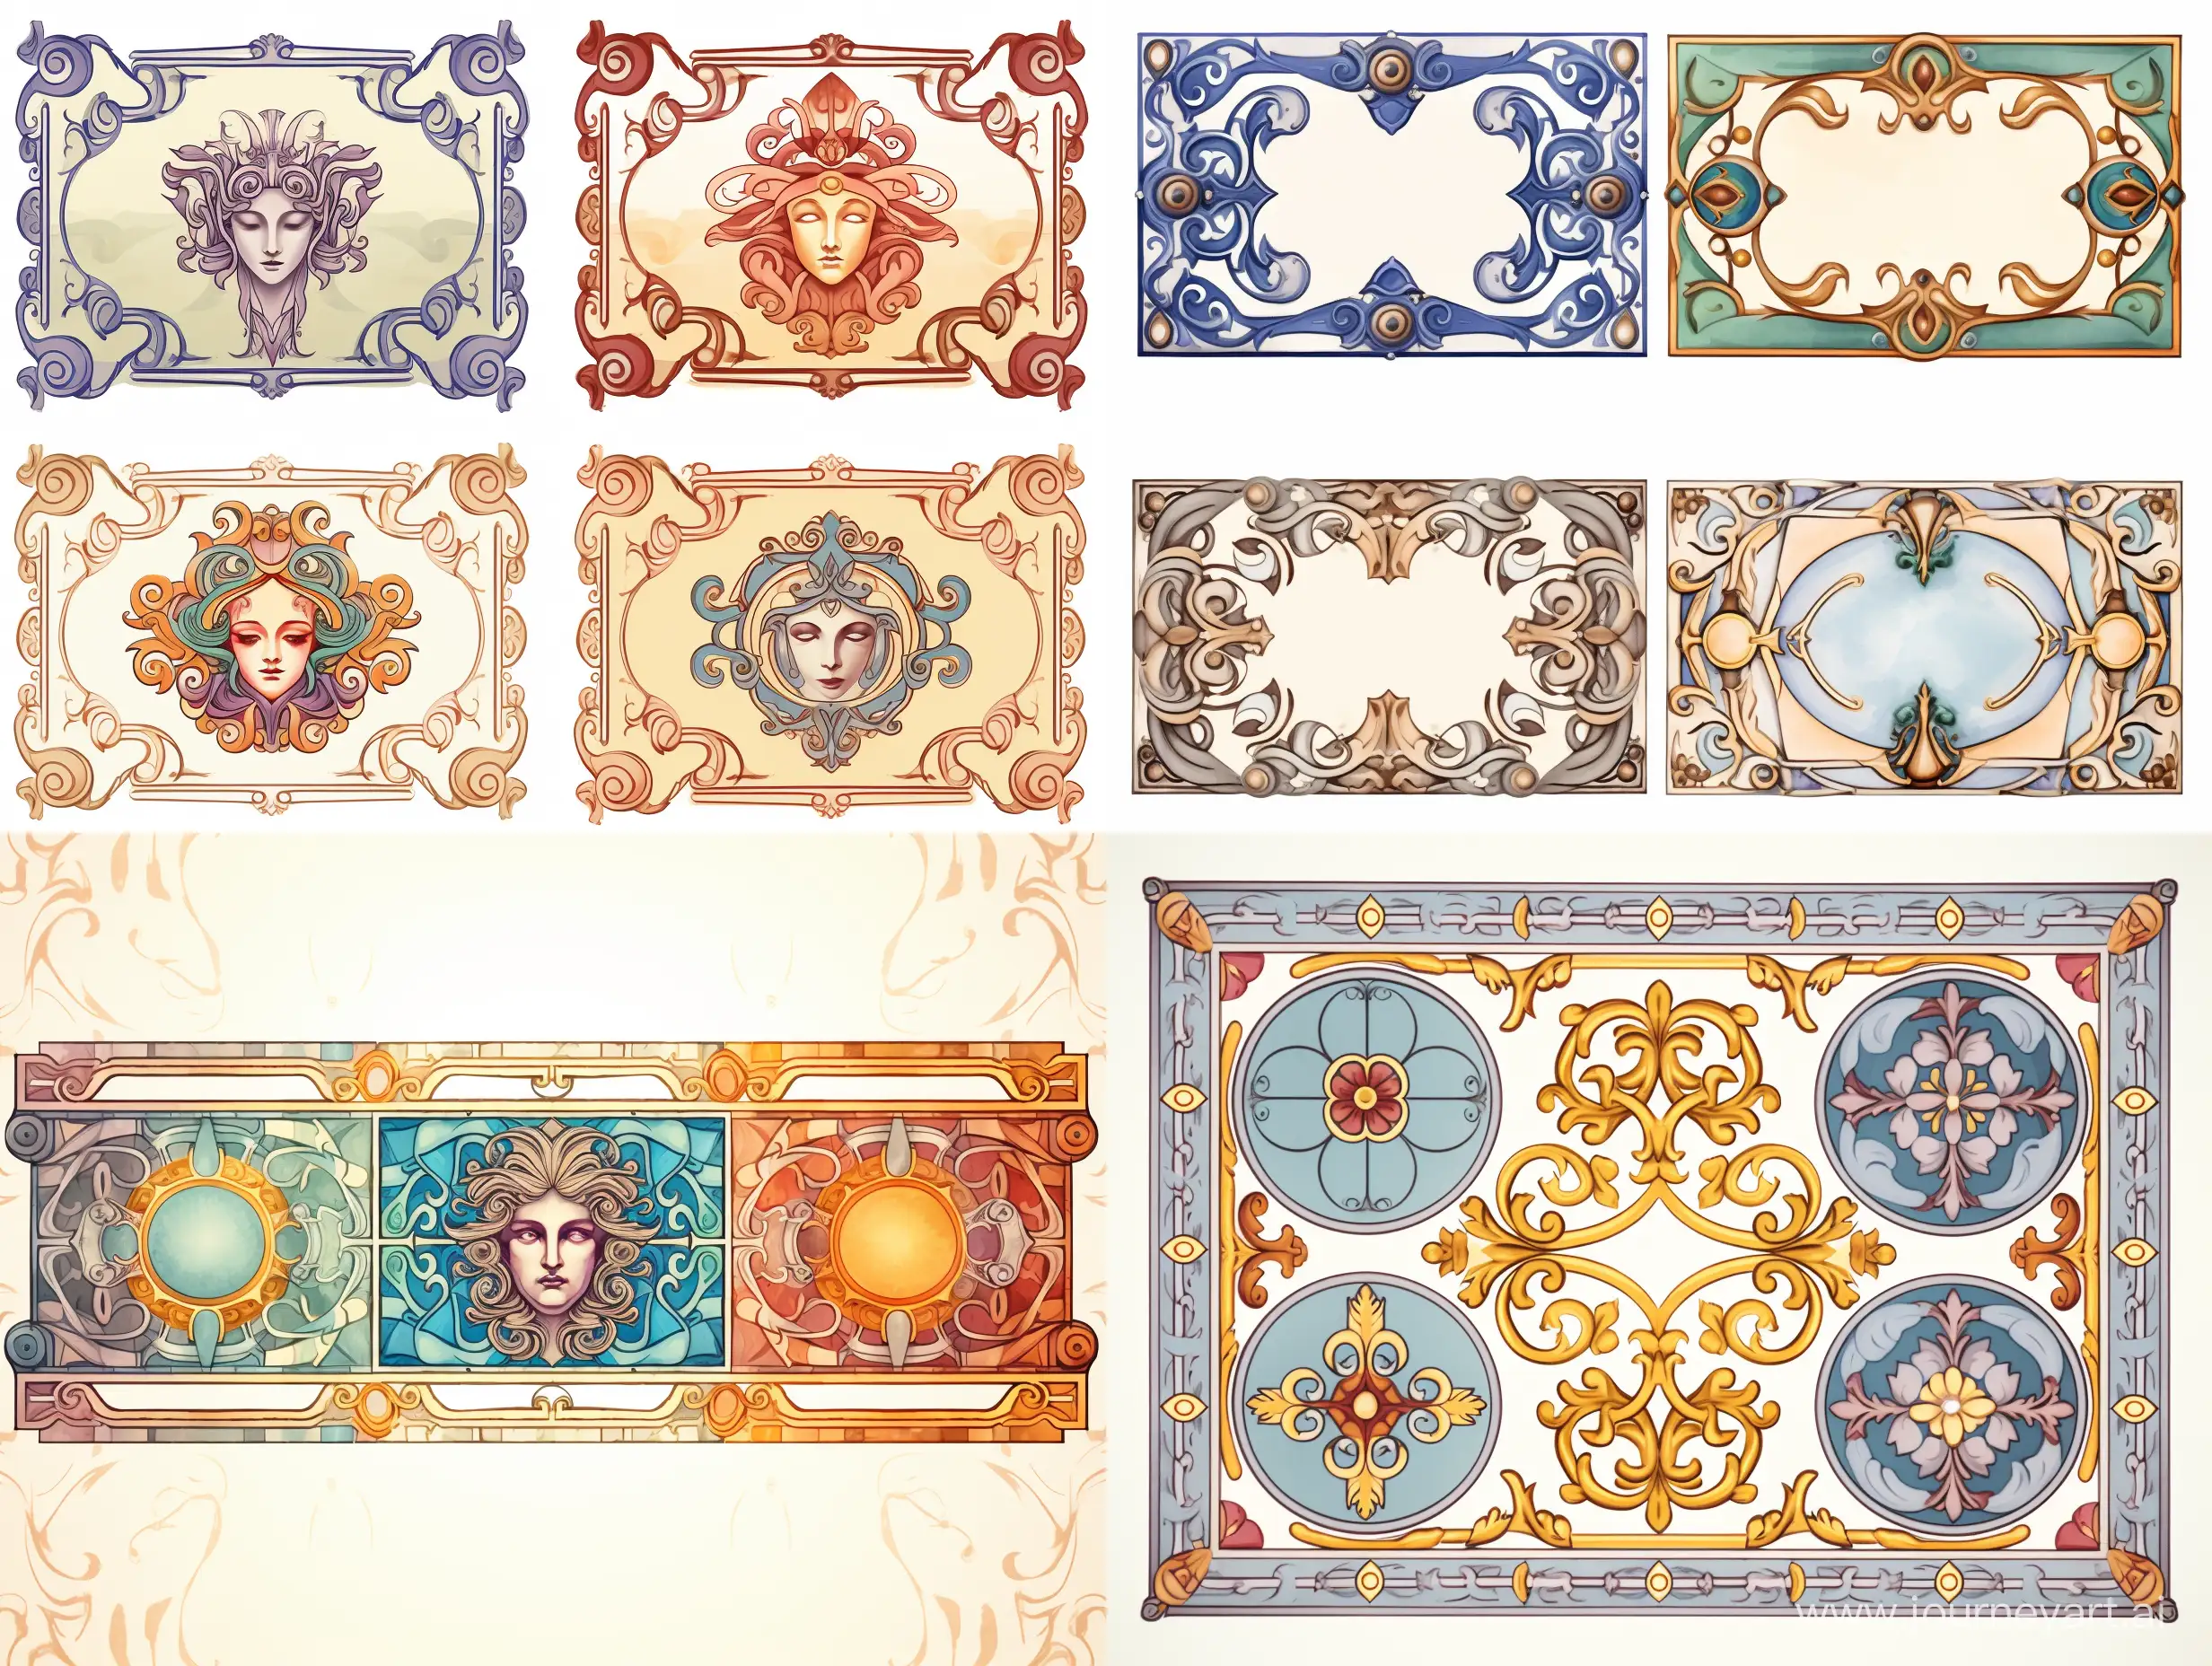 Four variants of the patterned ancient Roman ornament, in a rectangle, with an empty center, fabulous illustration, stylized caricature, Victor Ngai, watercolor, decorative, flat drawing